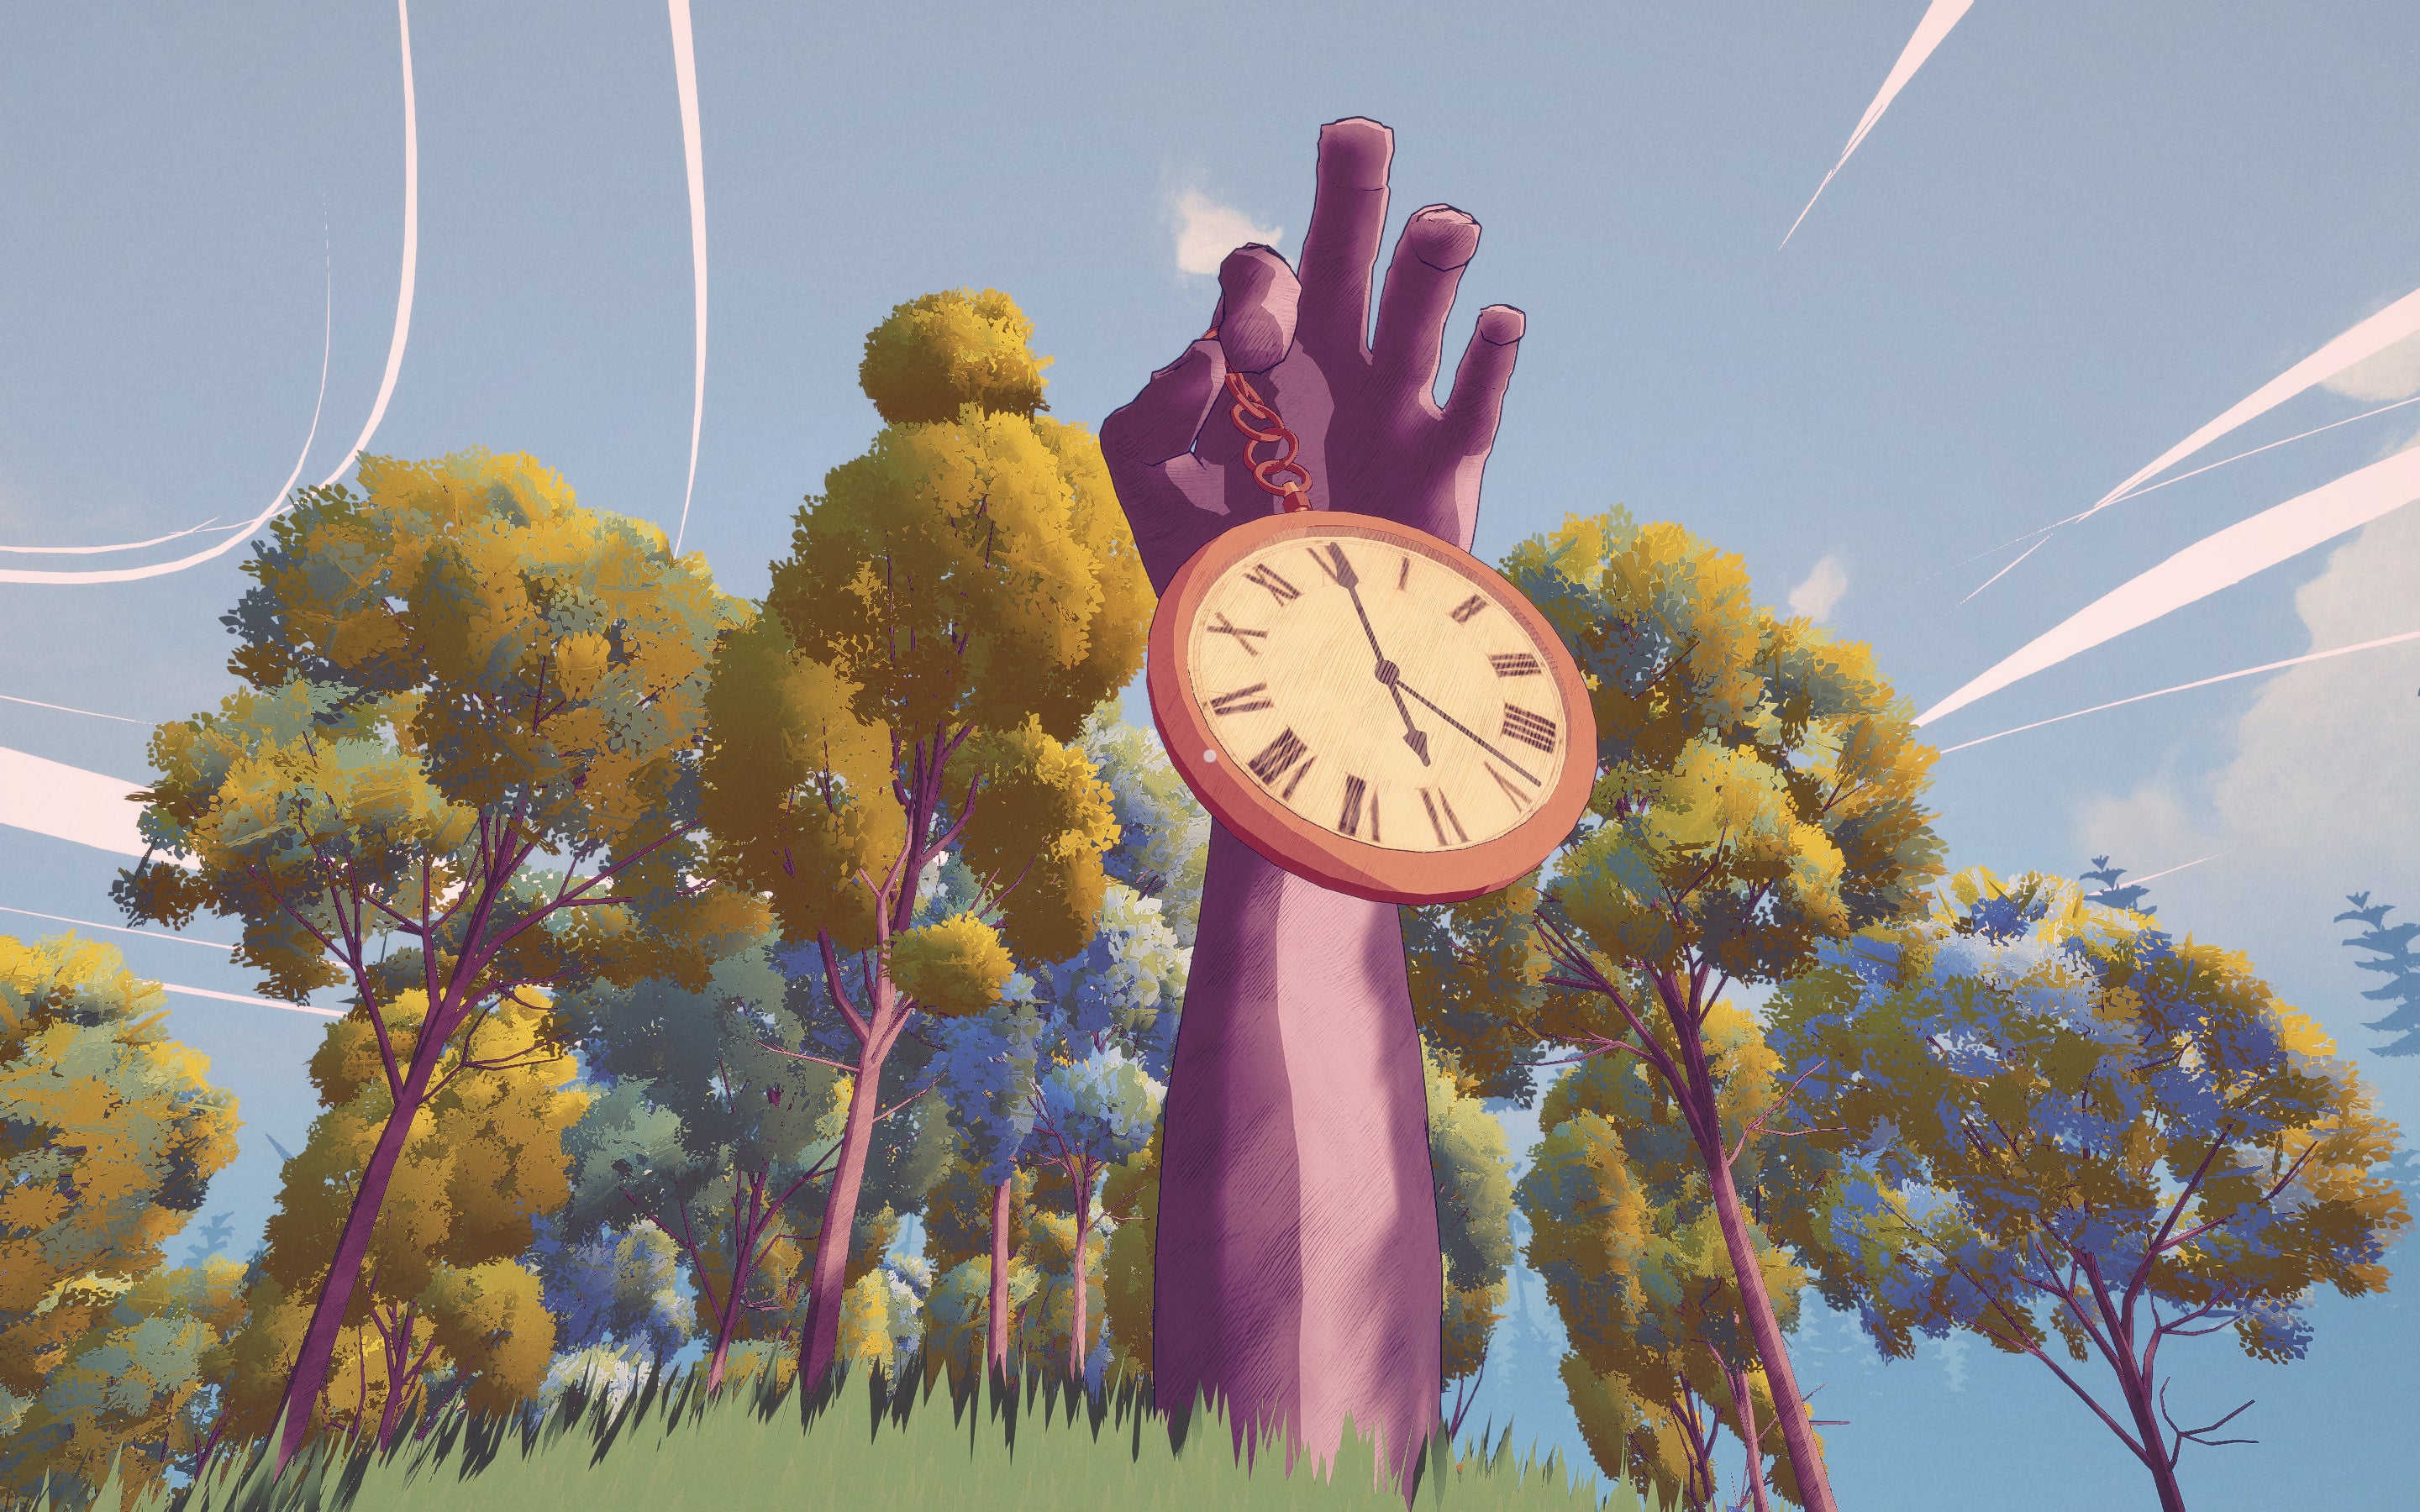 A giant hand emerging out of the ground, surrounded by leafy trees, is holding a large pocket watch. This represents the time limit in Summertime Madness